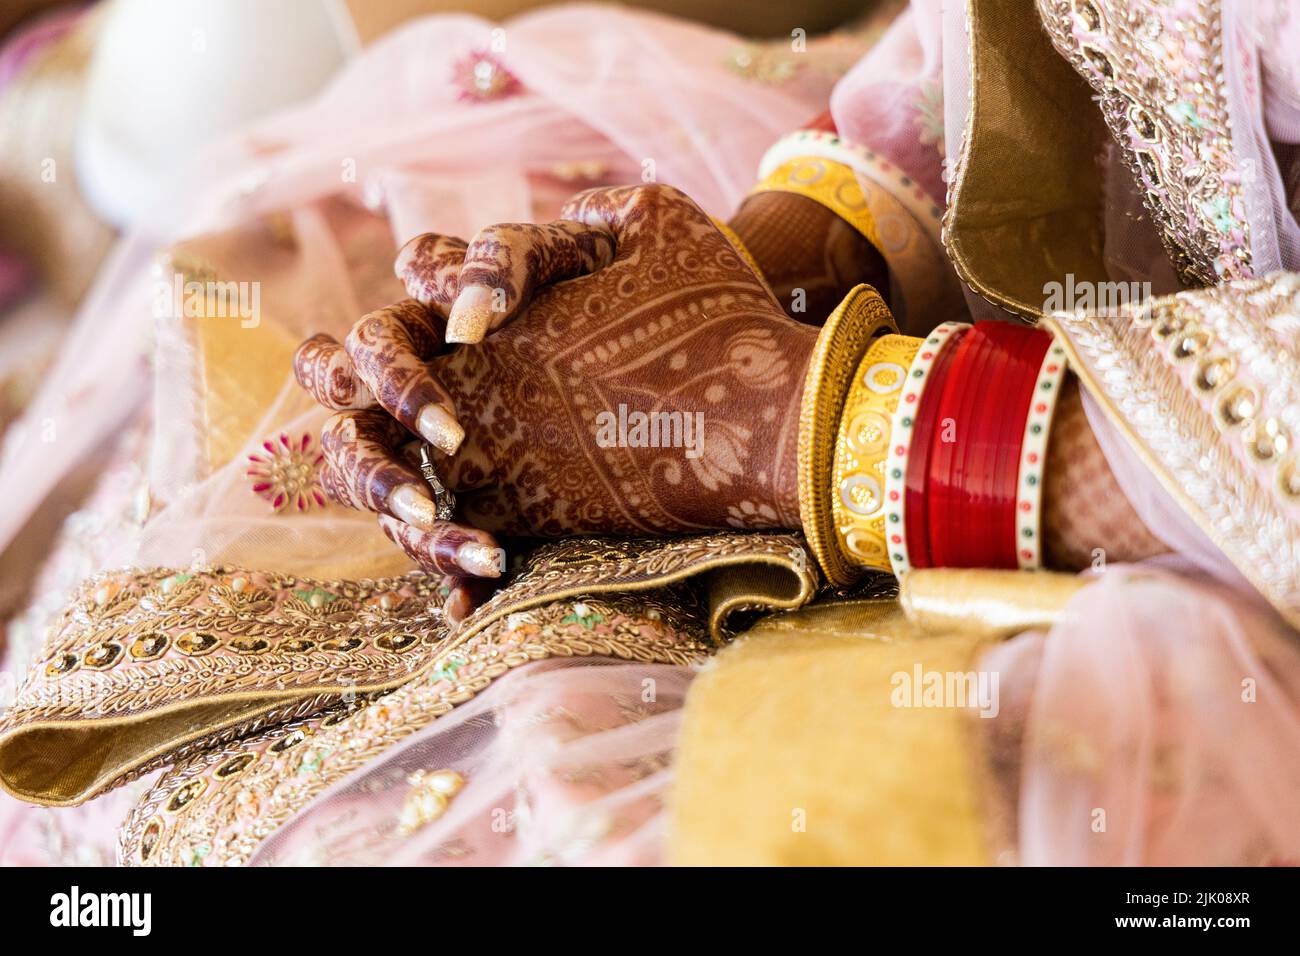 Beautiful Indian bride wearing red bangles and gold jewelry. Mehndi or Henna design on hands. New Indian bride at wedding. Stock Photo